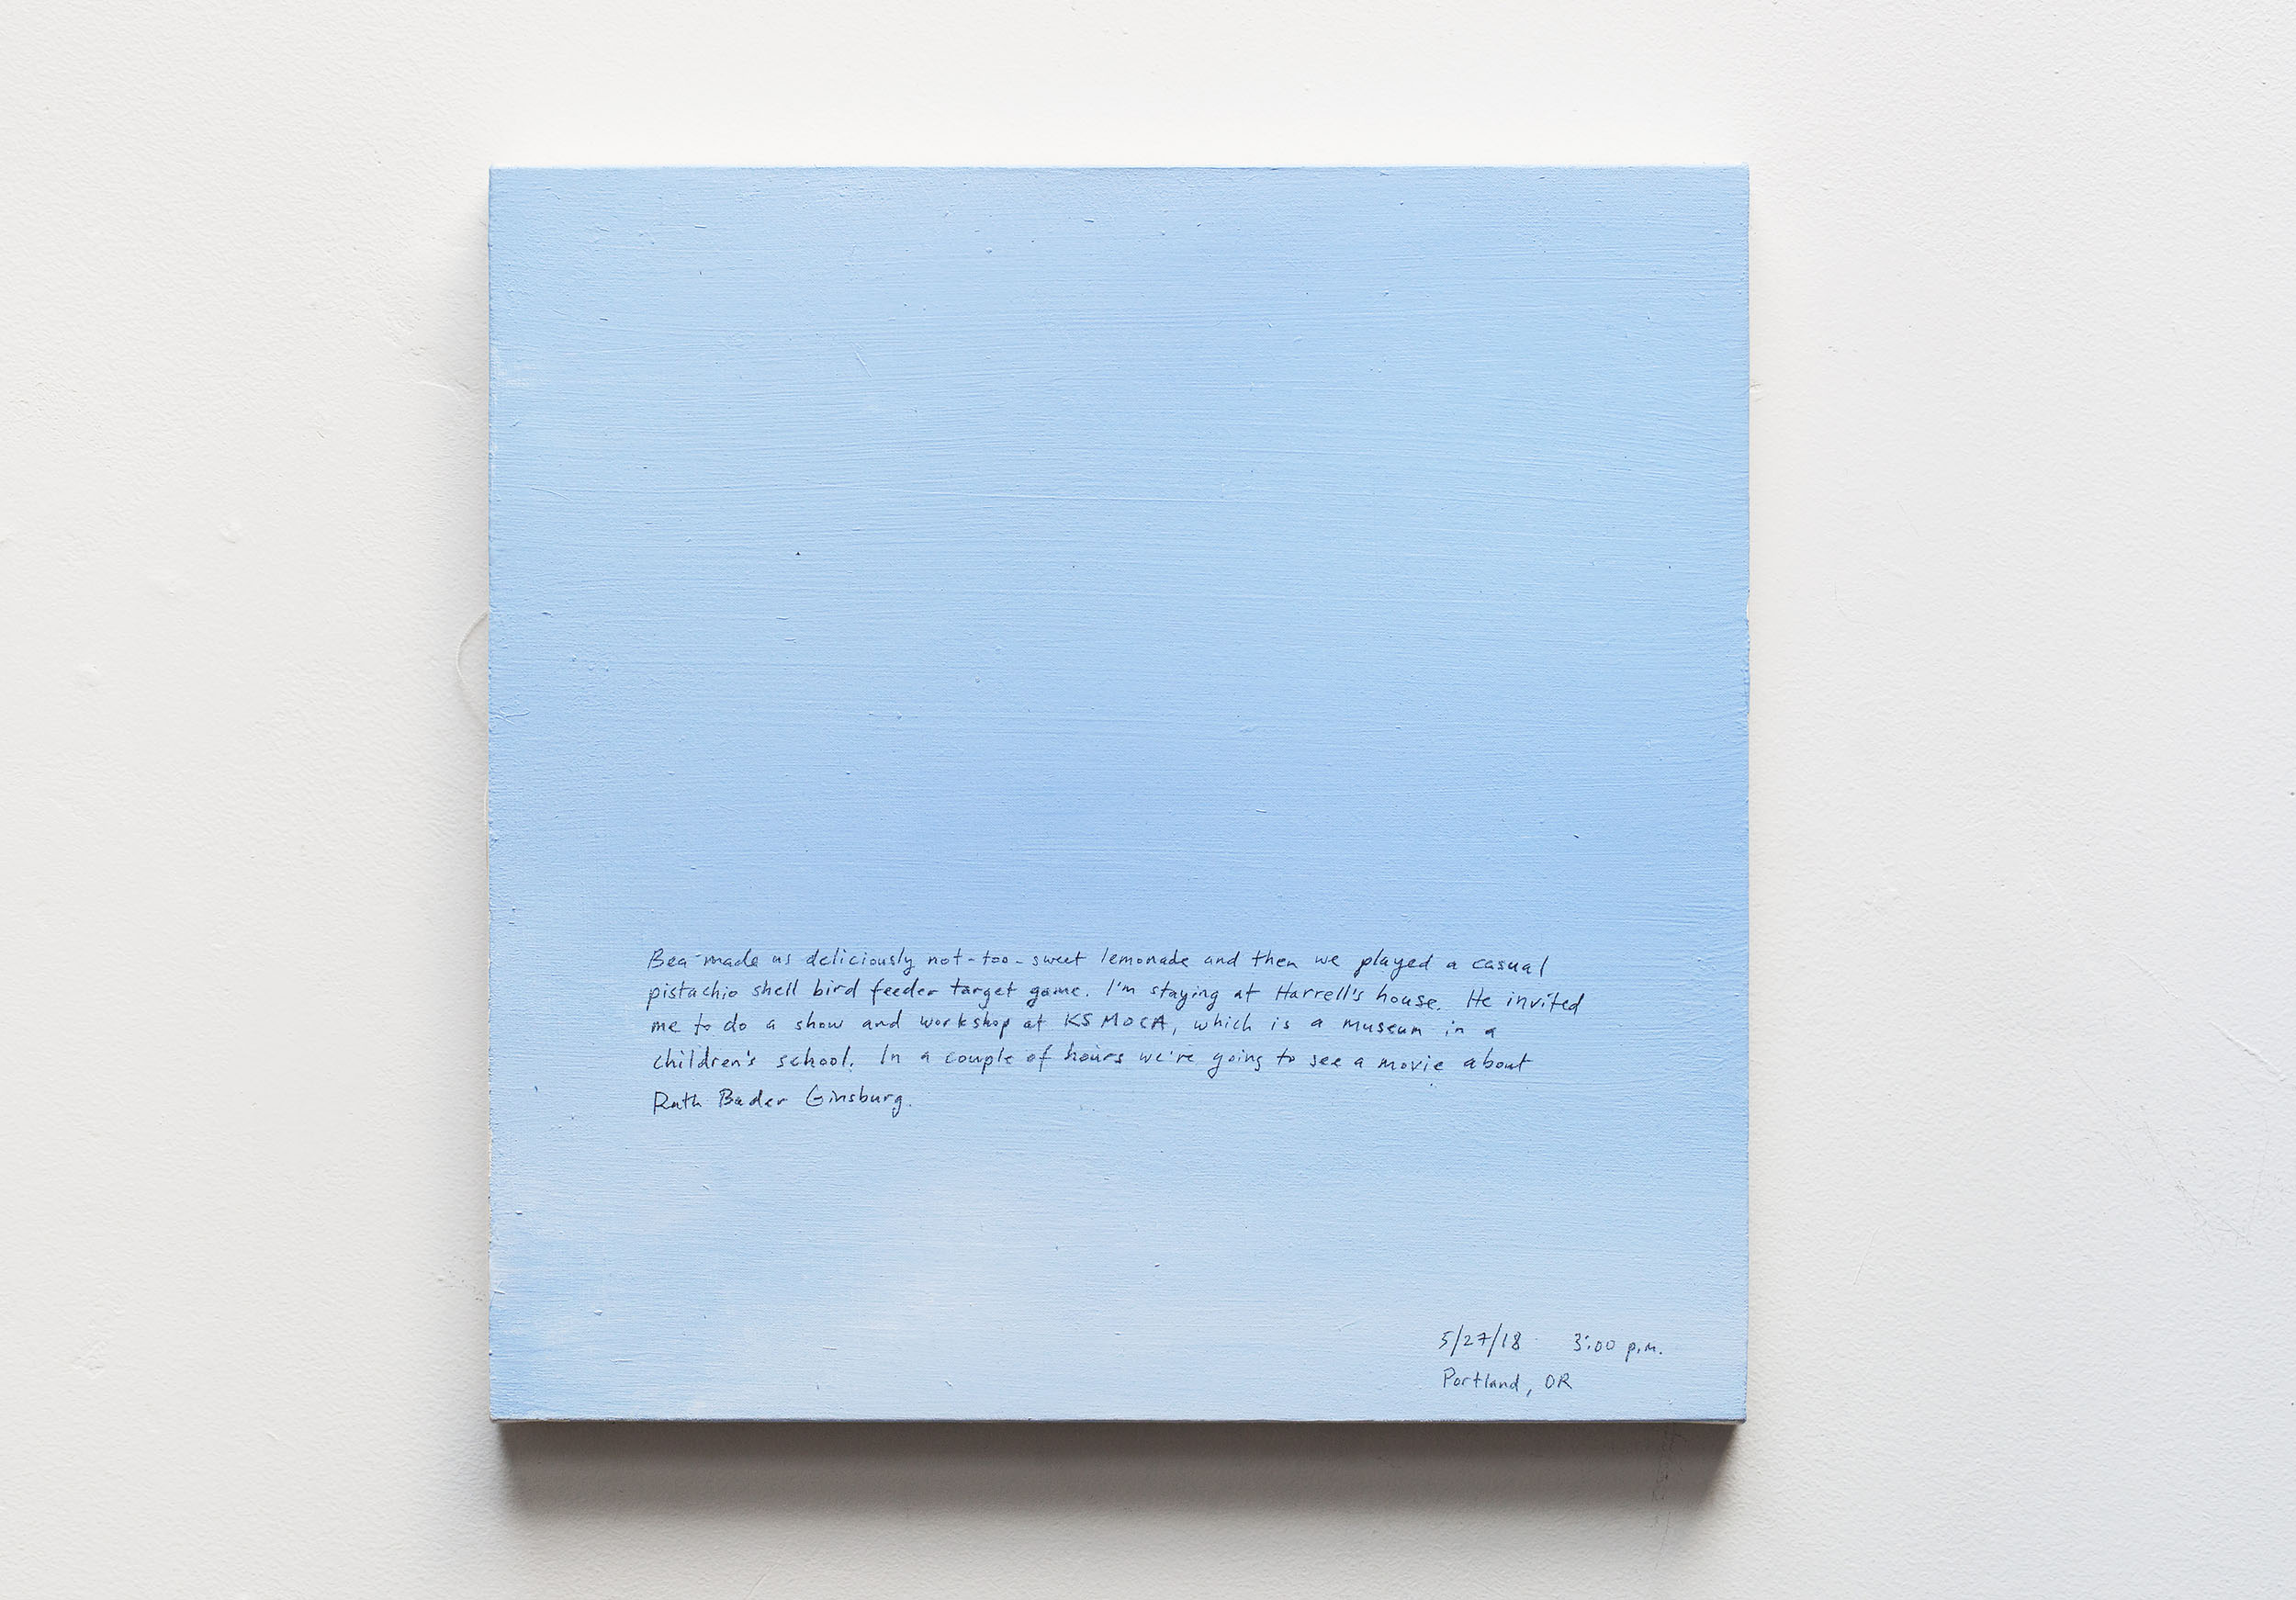 A 14 × 14 inch, acrylic painting of the sky. A journal entry is handwritten on the painting:

“Bea made us deliciously not-too-sweet lemonade and then we played a casual pistachio shell bird feeder target game. I’m staying at Harrell’s house. He invited me to do a show and workshop at KSMOCA, which is a museum in a children’s school. In a couple of hours we’re going to see a movie about Ruth Bader Ginsburg.

5/27/18 3:00 p.m.
Portland, OR”